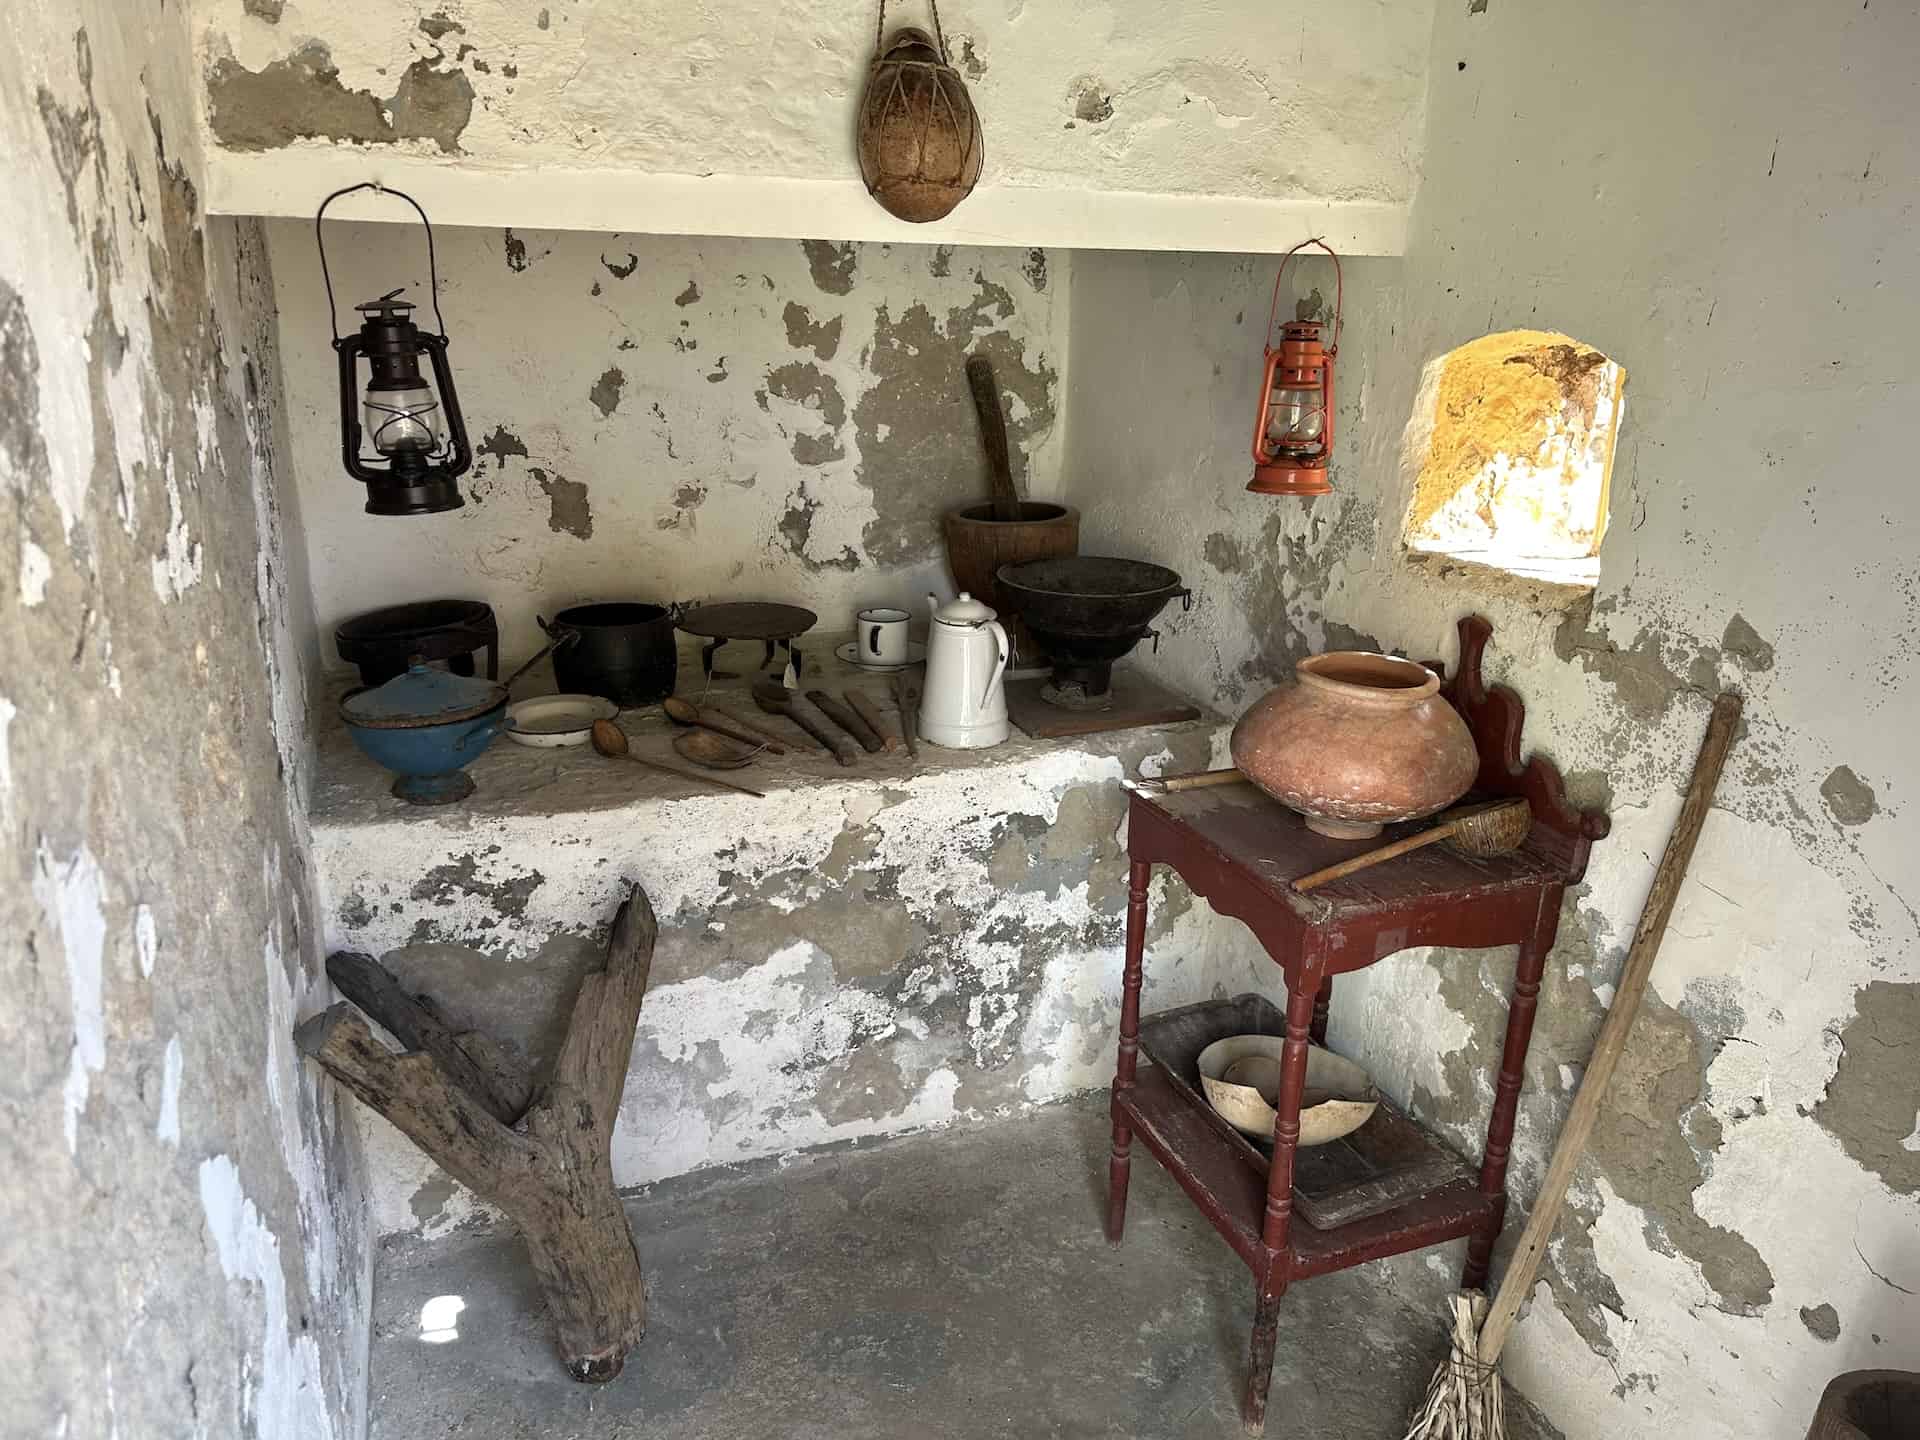 Kitchen at Fort Zoutman